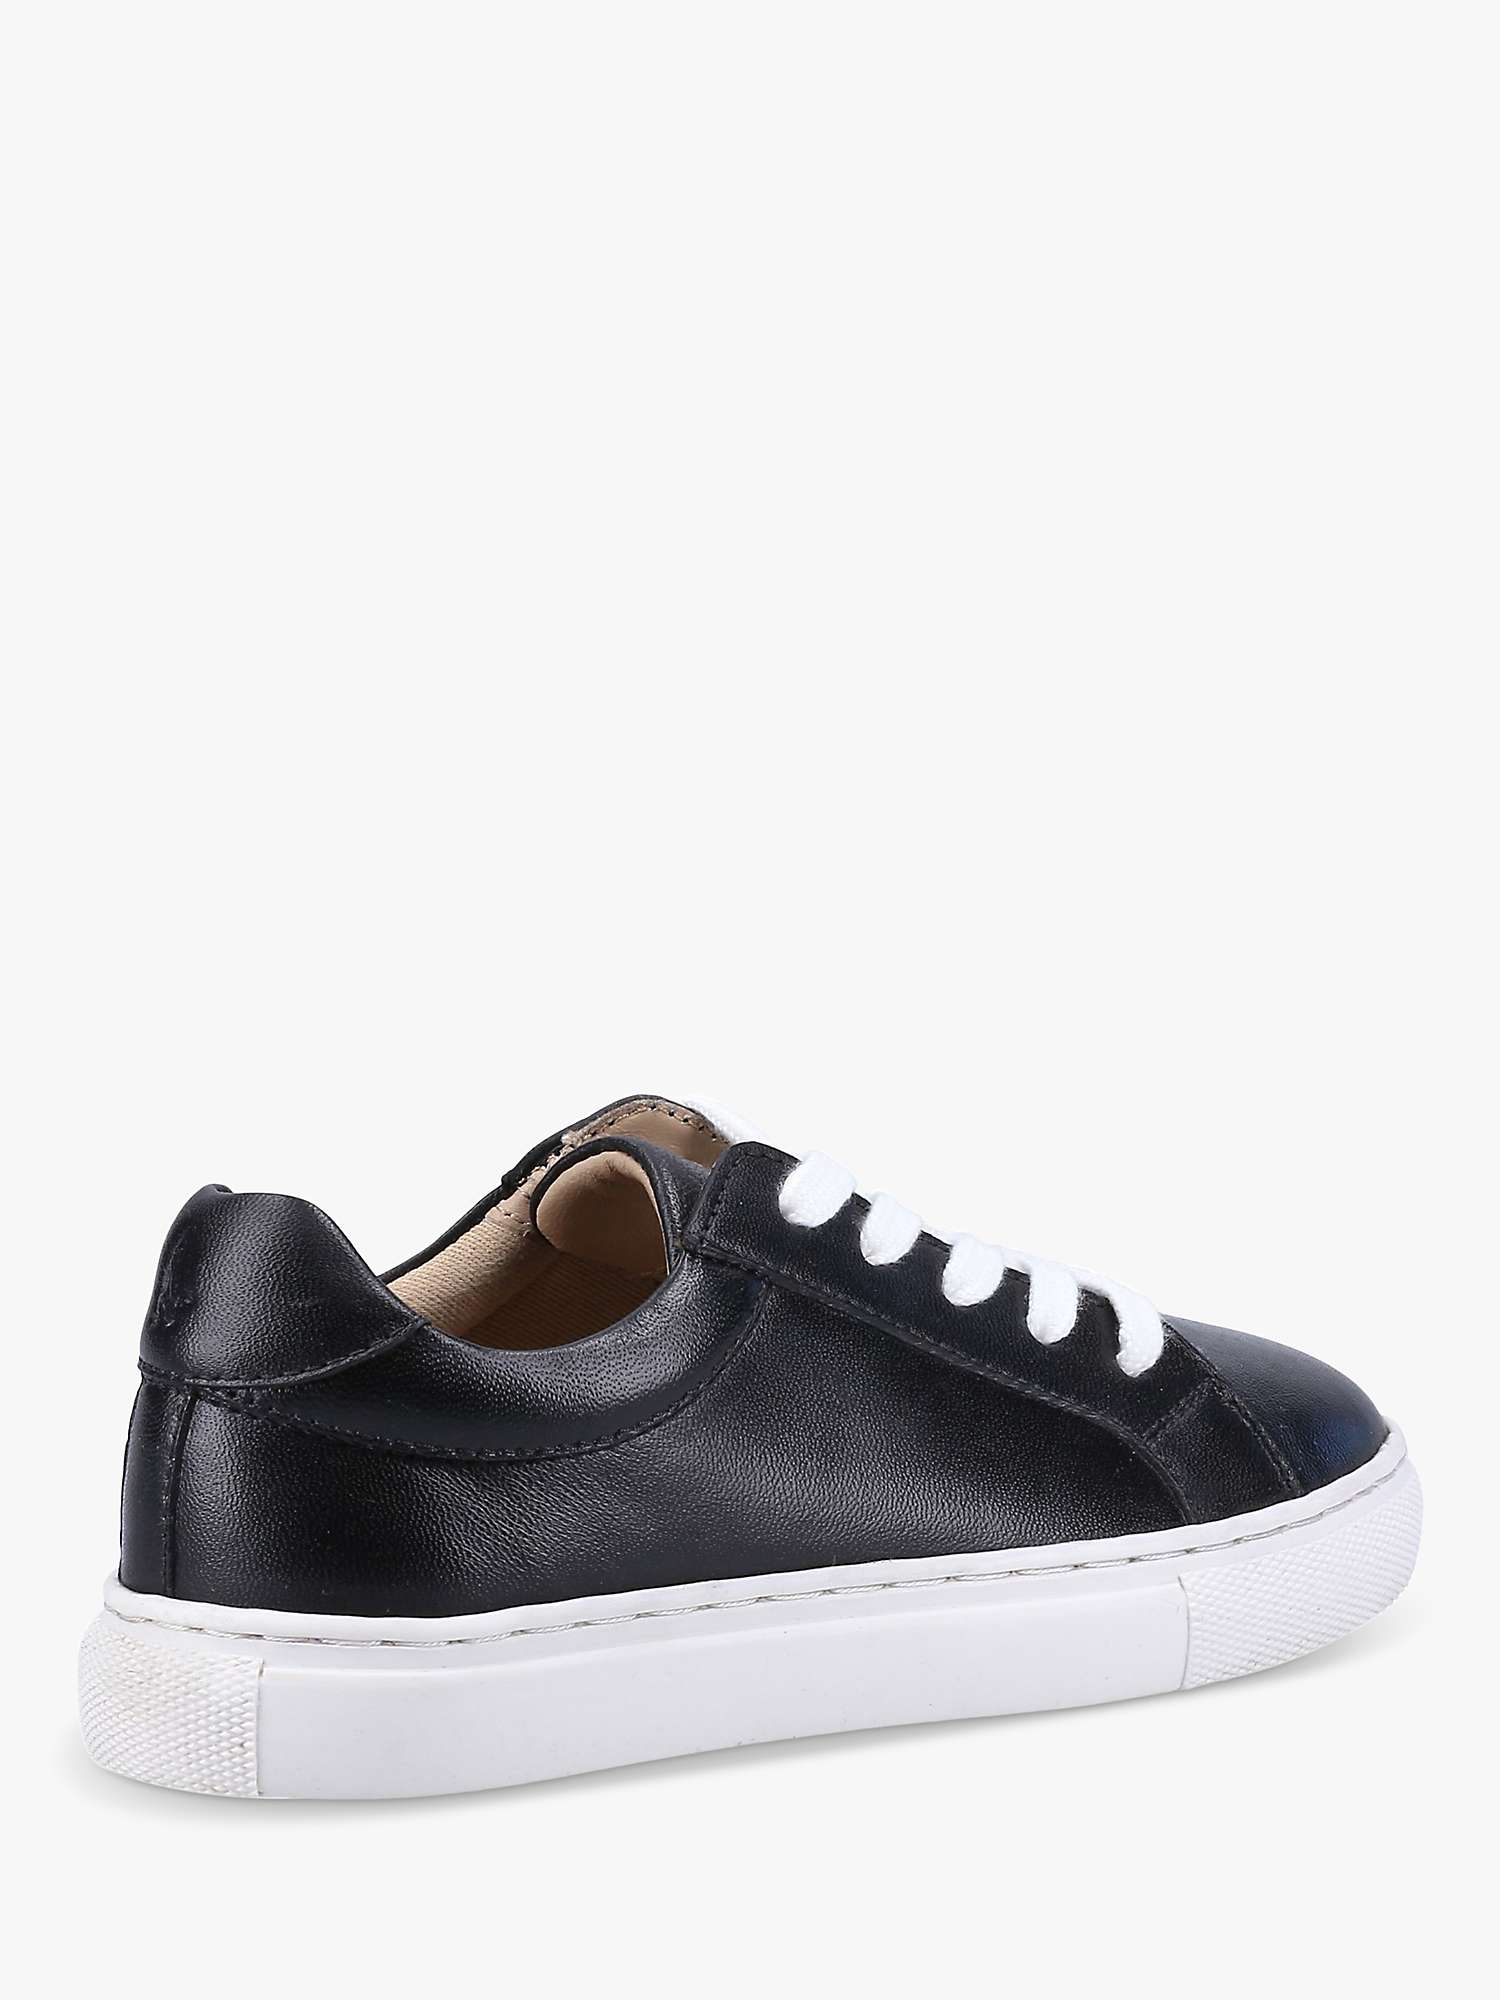 Buy Hush Puppies Kids' Mini Colton Leather Trainers Online at johnlewis.com